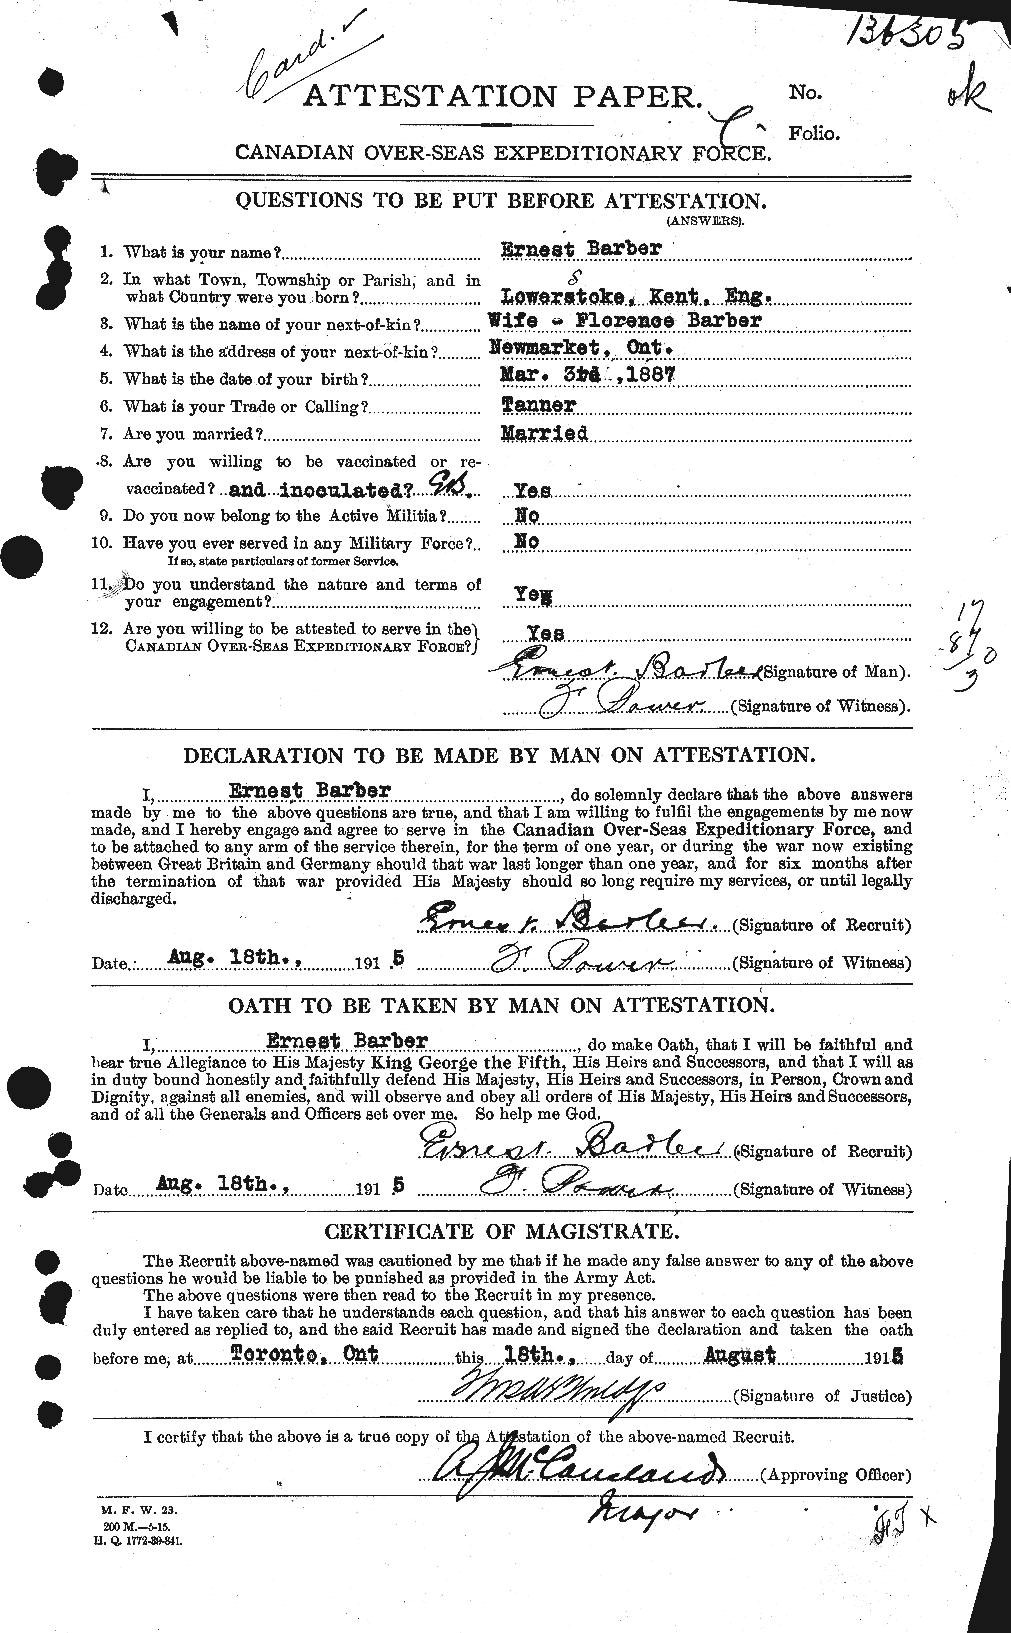 Personnel Records of the First World War - CEF 219150a